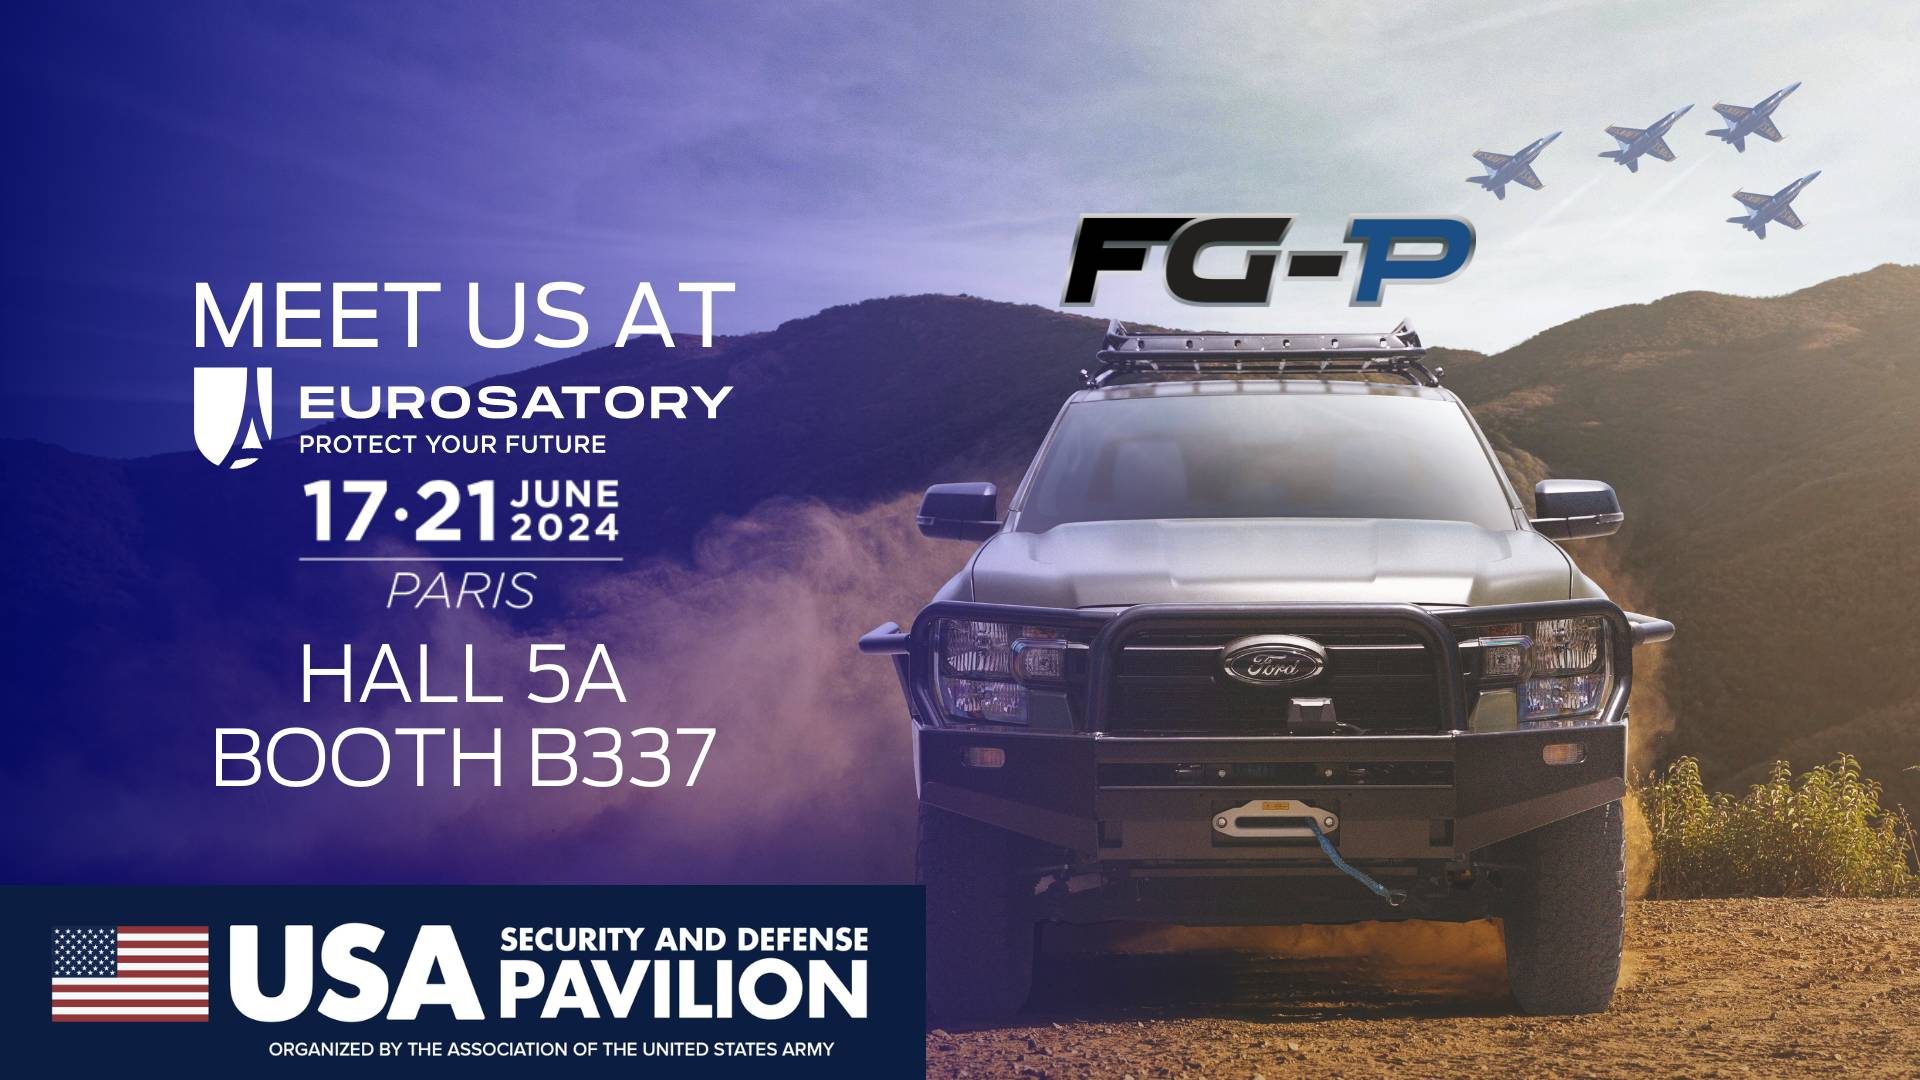 Meet Us At Eurosatory June 17-21, 2024 Hall 5A Booth B337 USA Security And Defense Pavilion